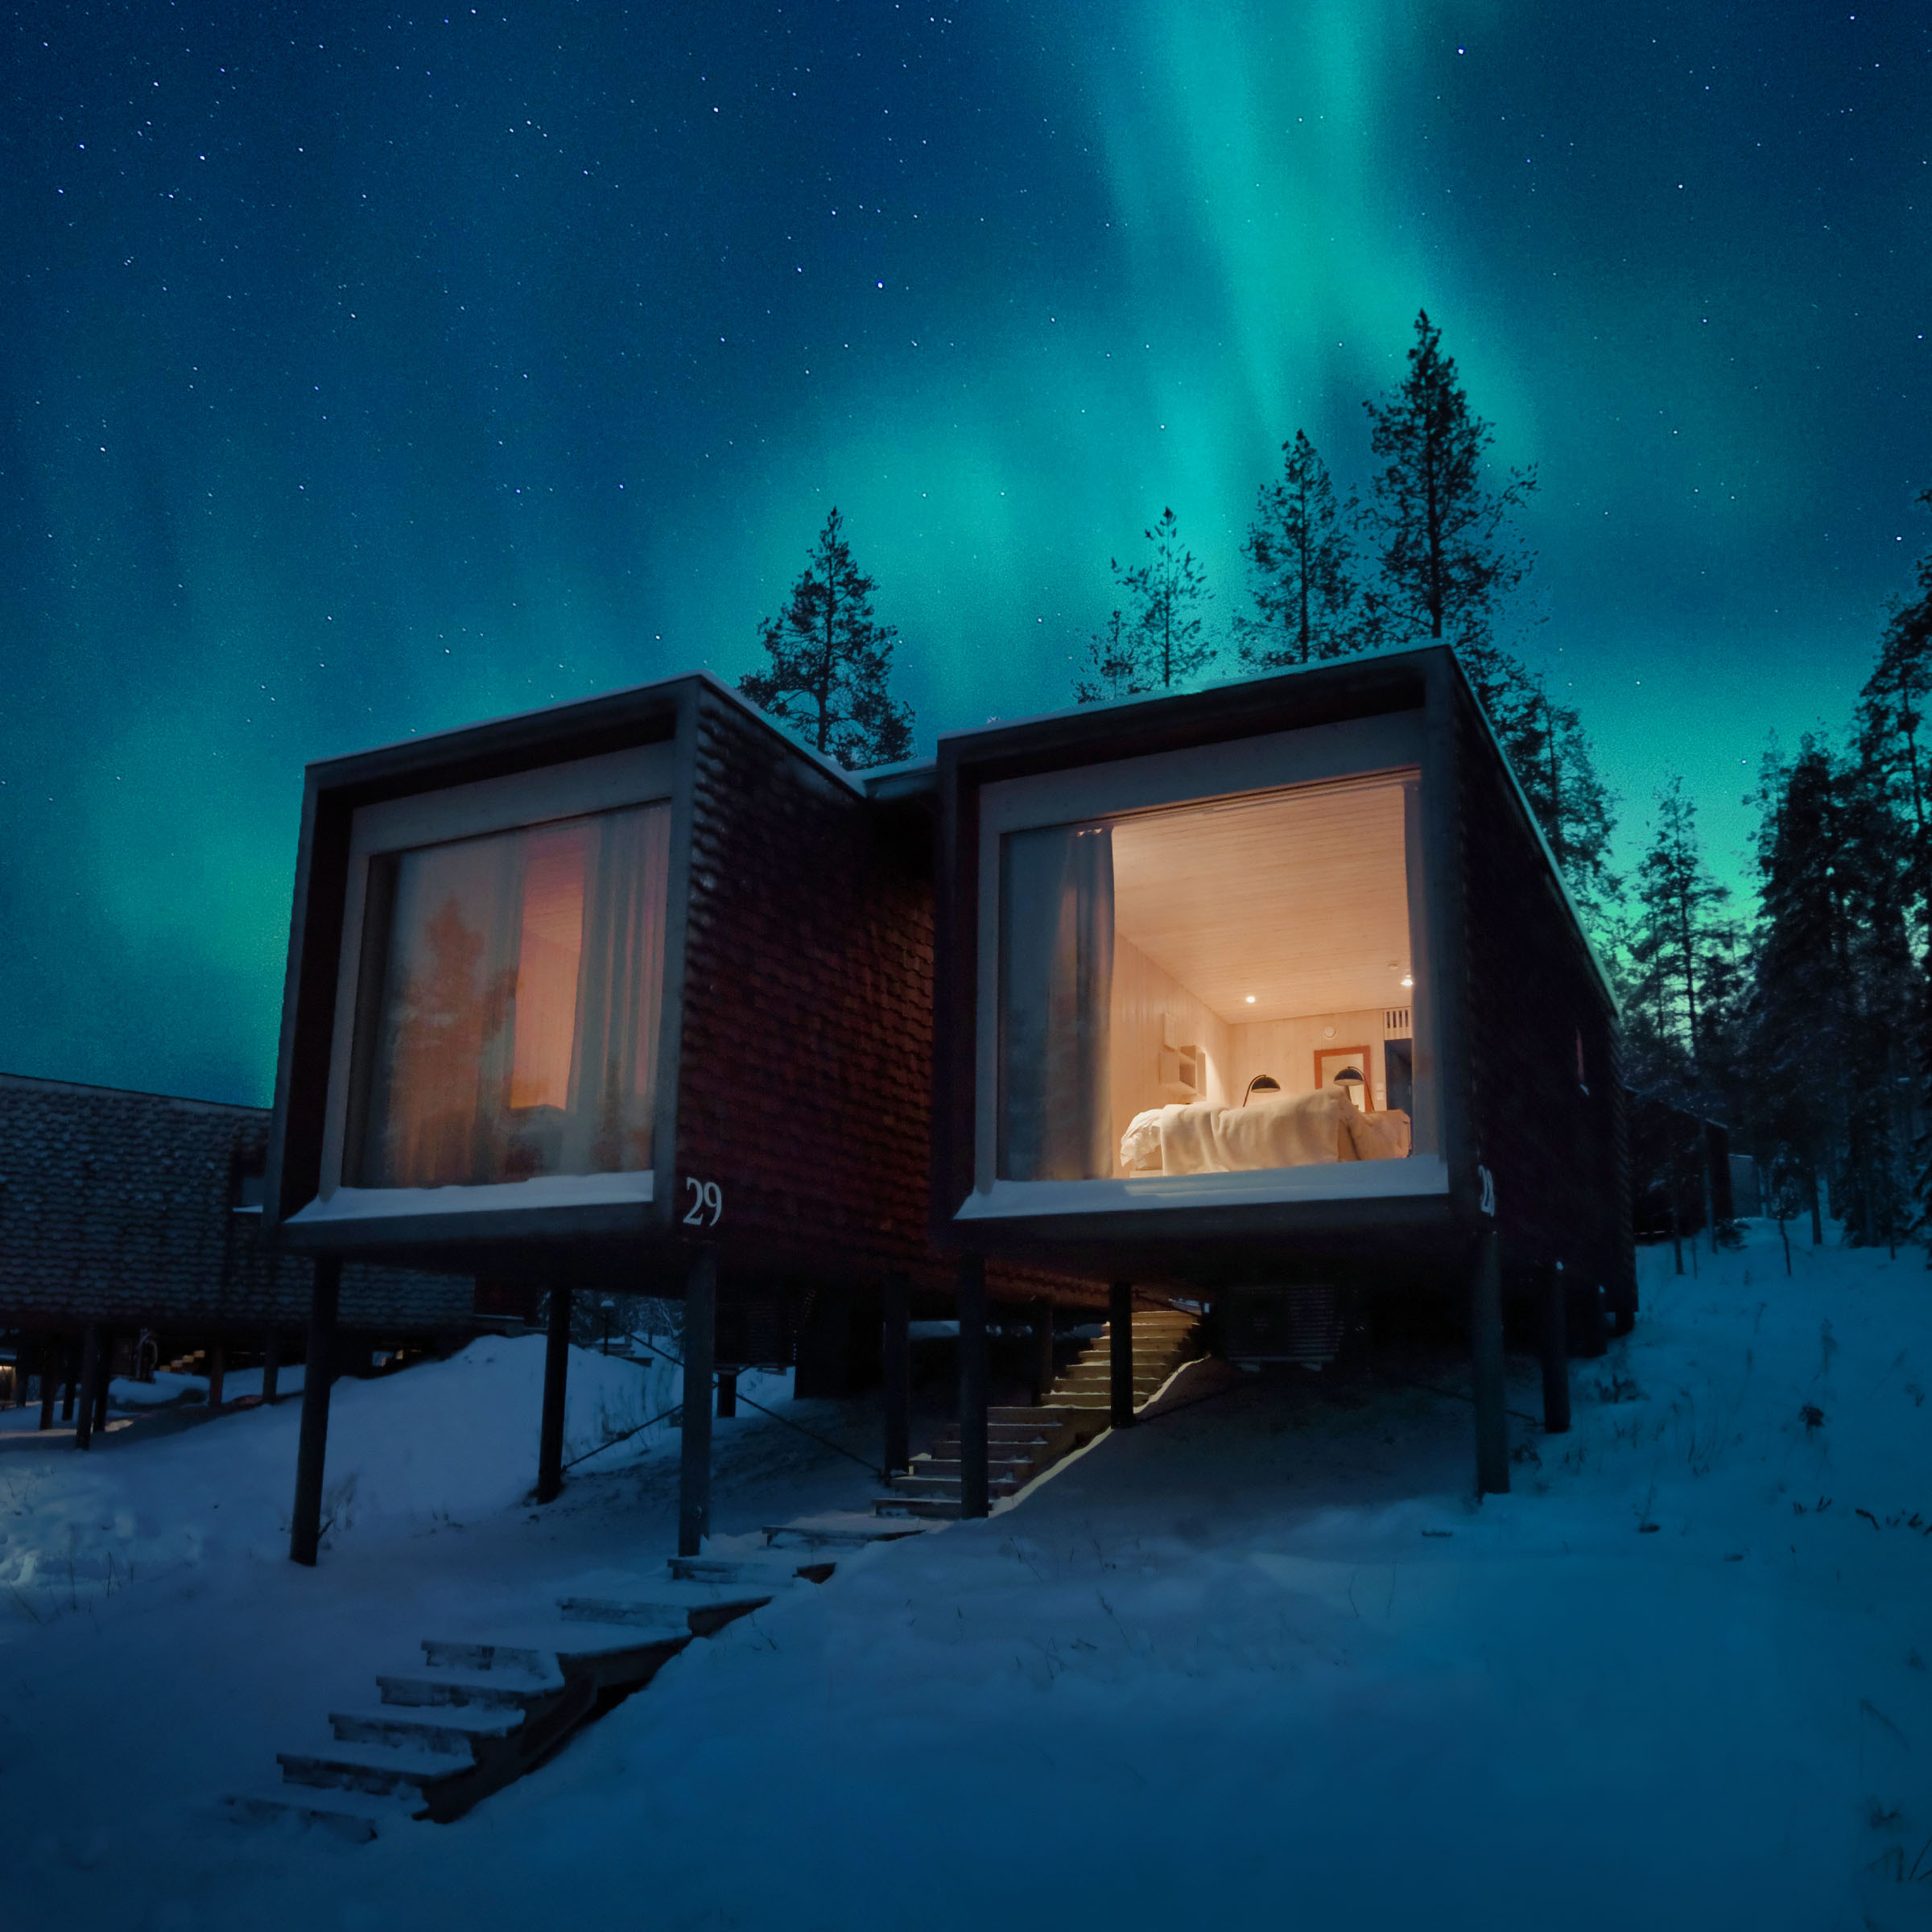 Arctic TreeHouse Hotel suites under the northern lights in Rovaniemi, Lapland Finland